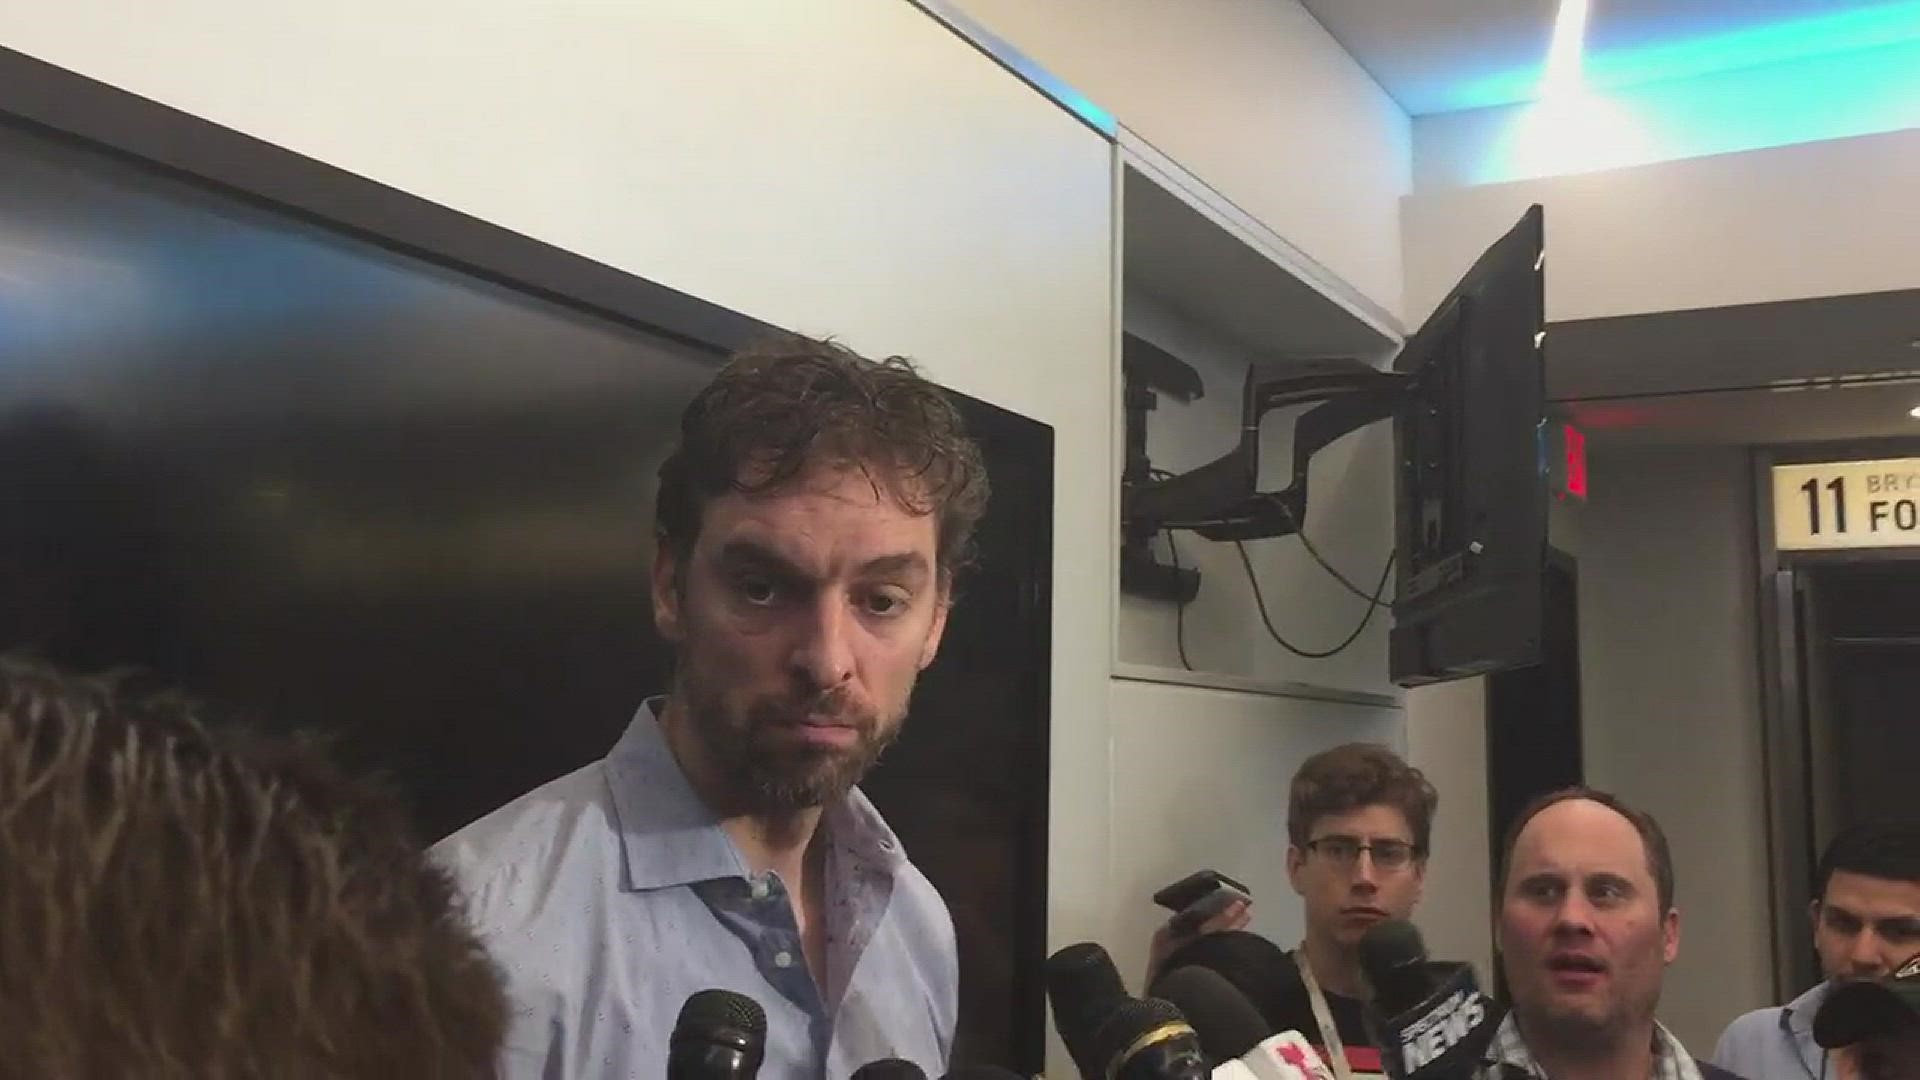 Pau Gasol talks about Friday night's loss to the 76ers